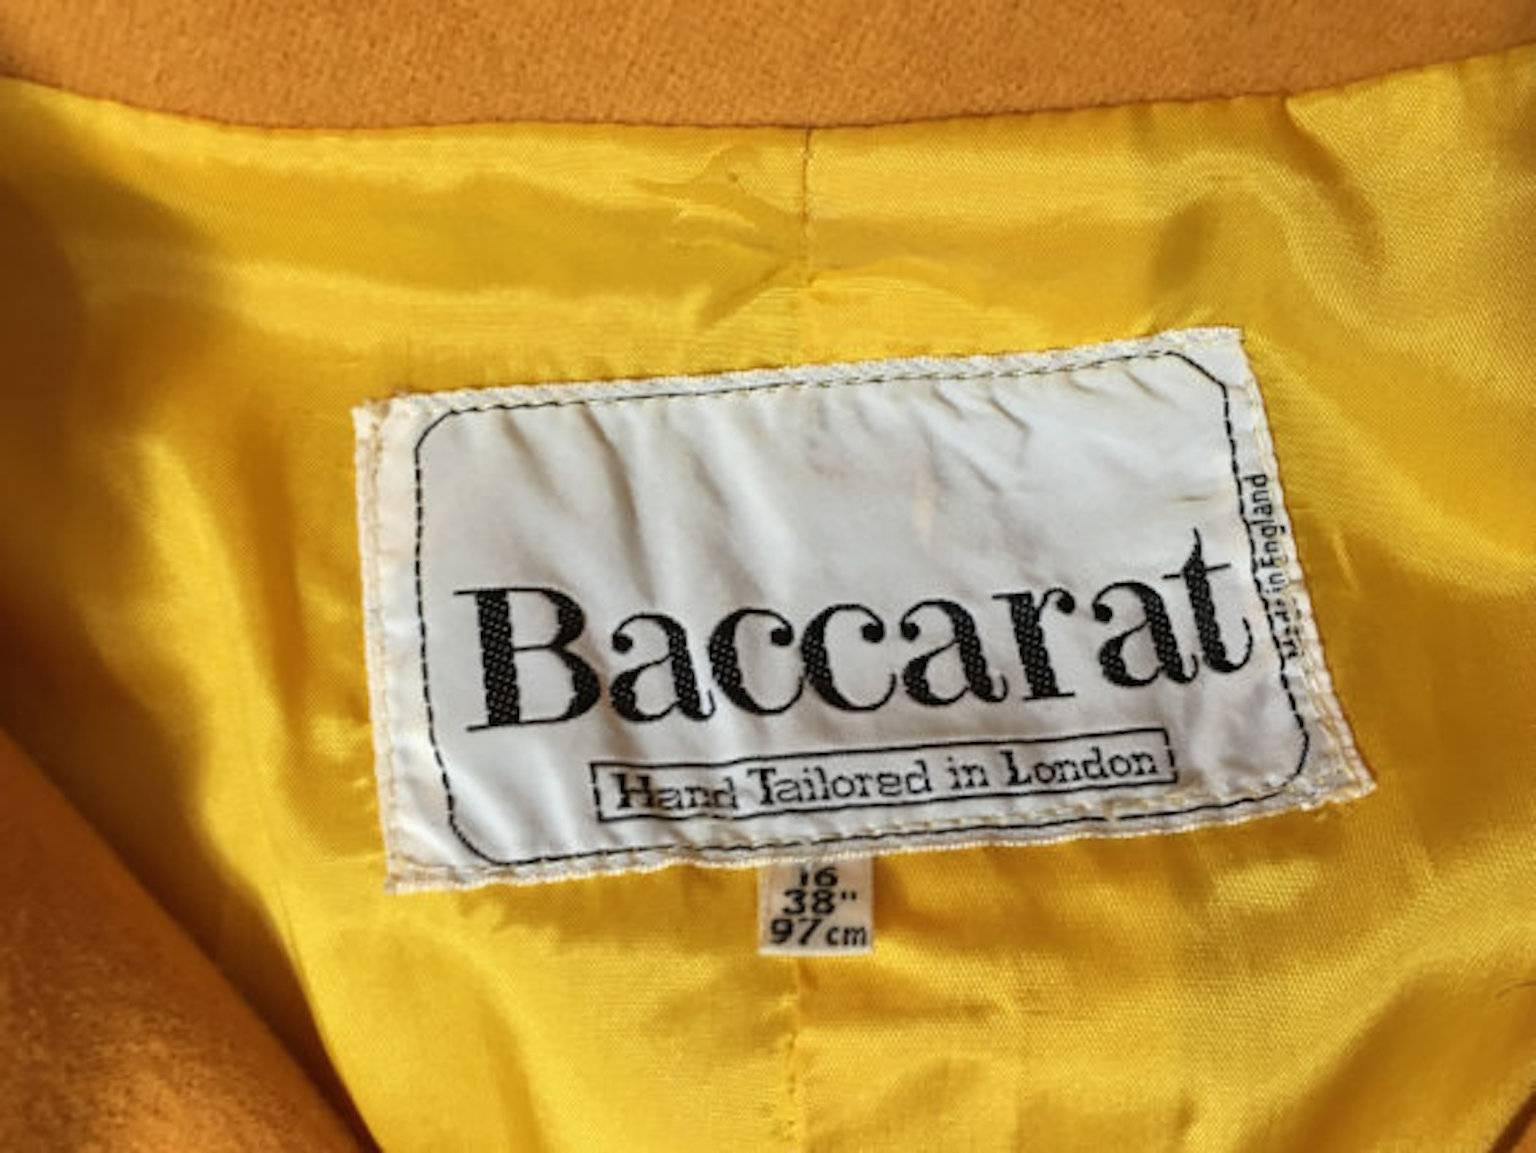 1970s Baccarat Bill Gibb Era Yellow 100% Wool Coat. Made from wool and leather trims, has toggle buttons and tie waist belt. Fully lined.

Size UK 10/12 Measuring 19.5 inches across bust, 16.5 inches across waist and 48 inches length

Excellent